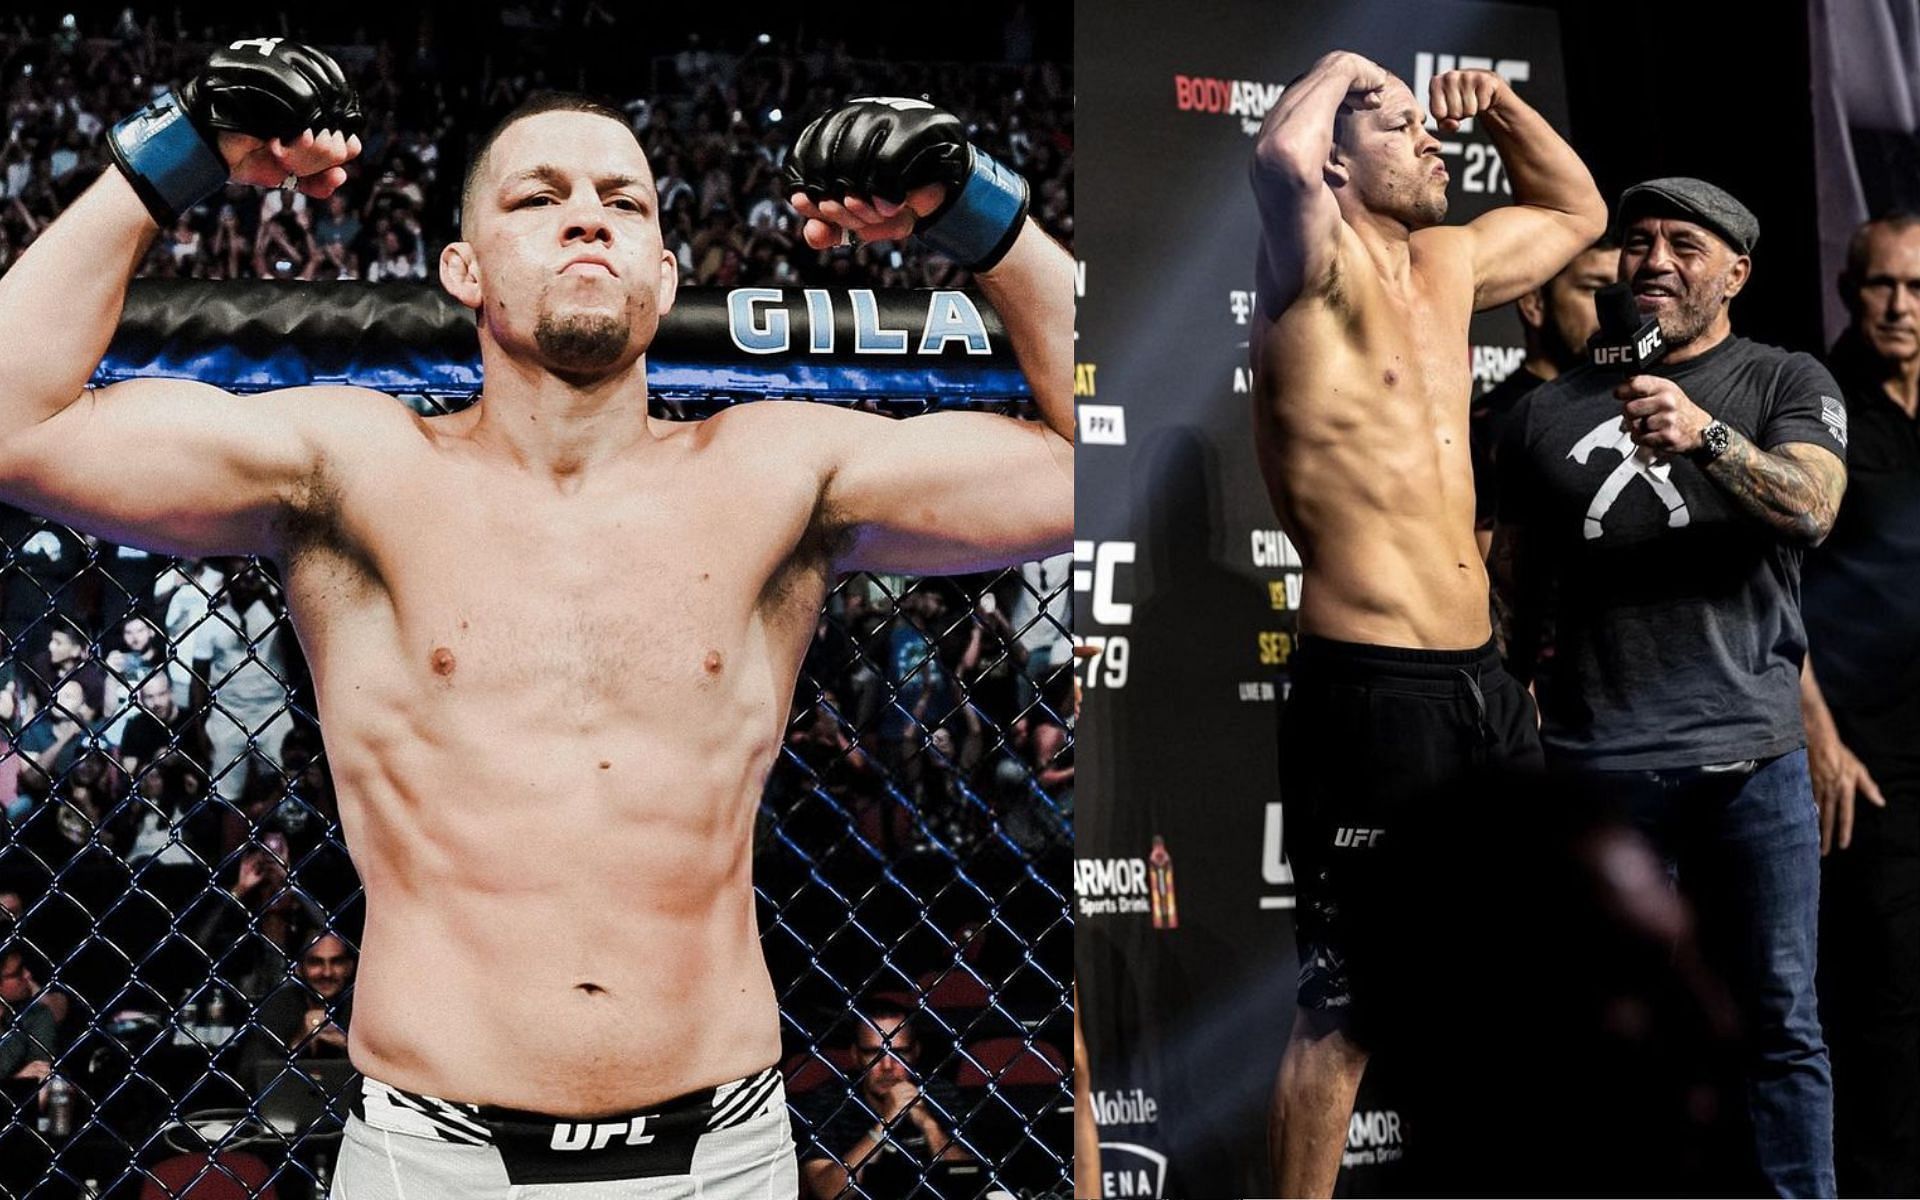 Stockton based UFC star Nate Diaz will be handed key to the city as tribute to his legendary career [Images via: @natediaz209 on Instagram]